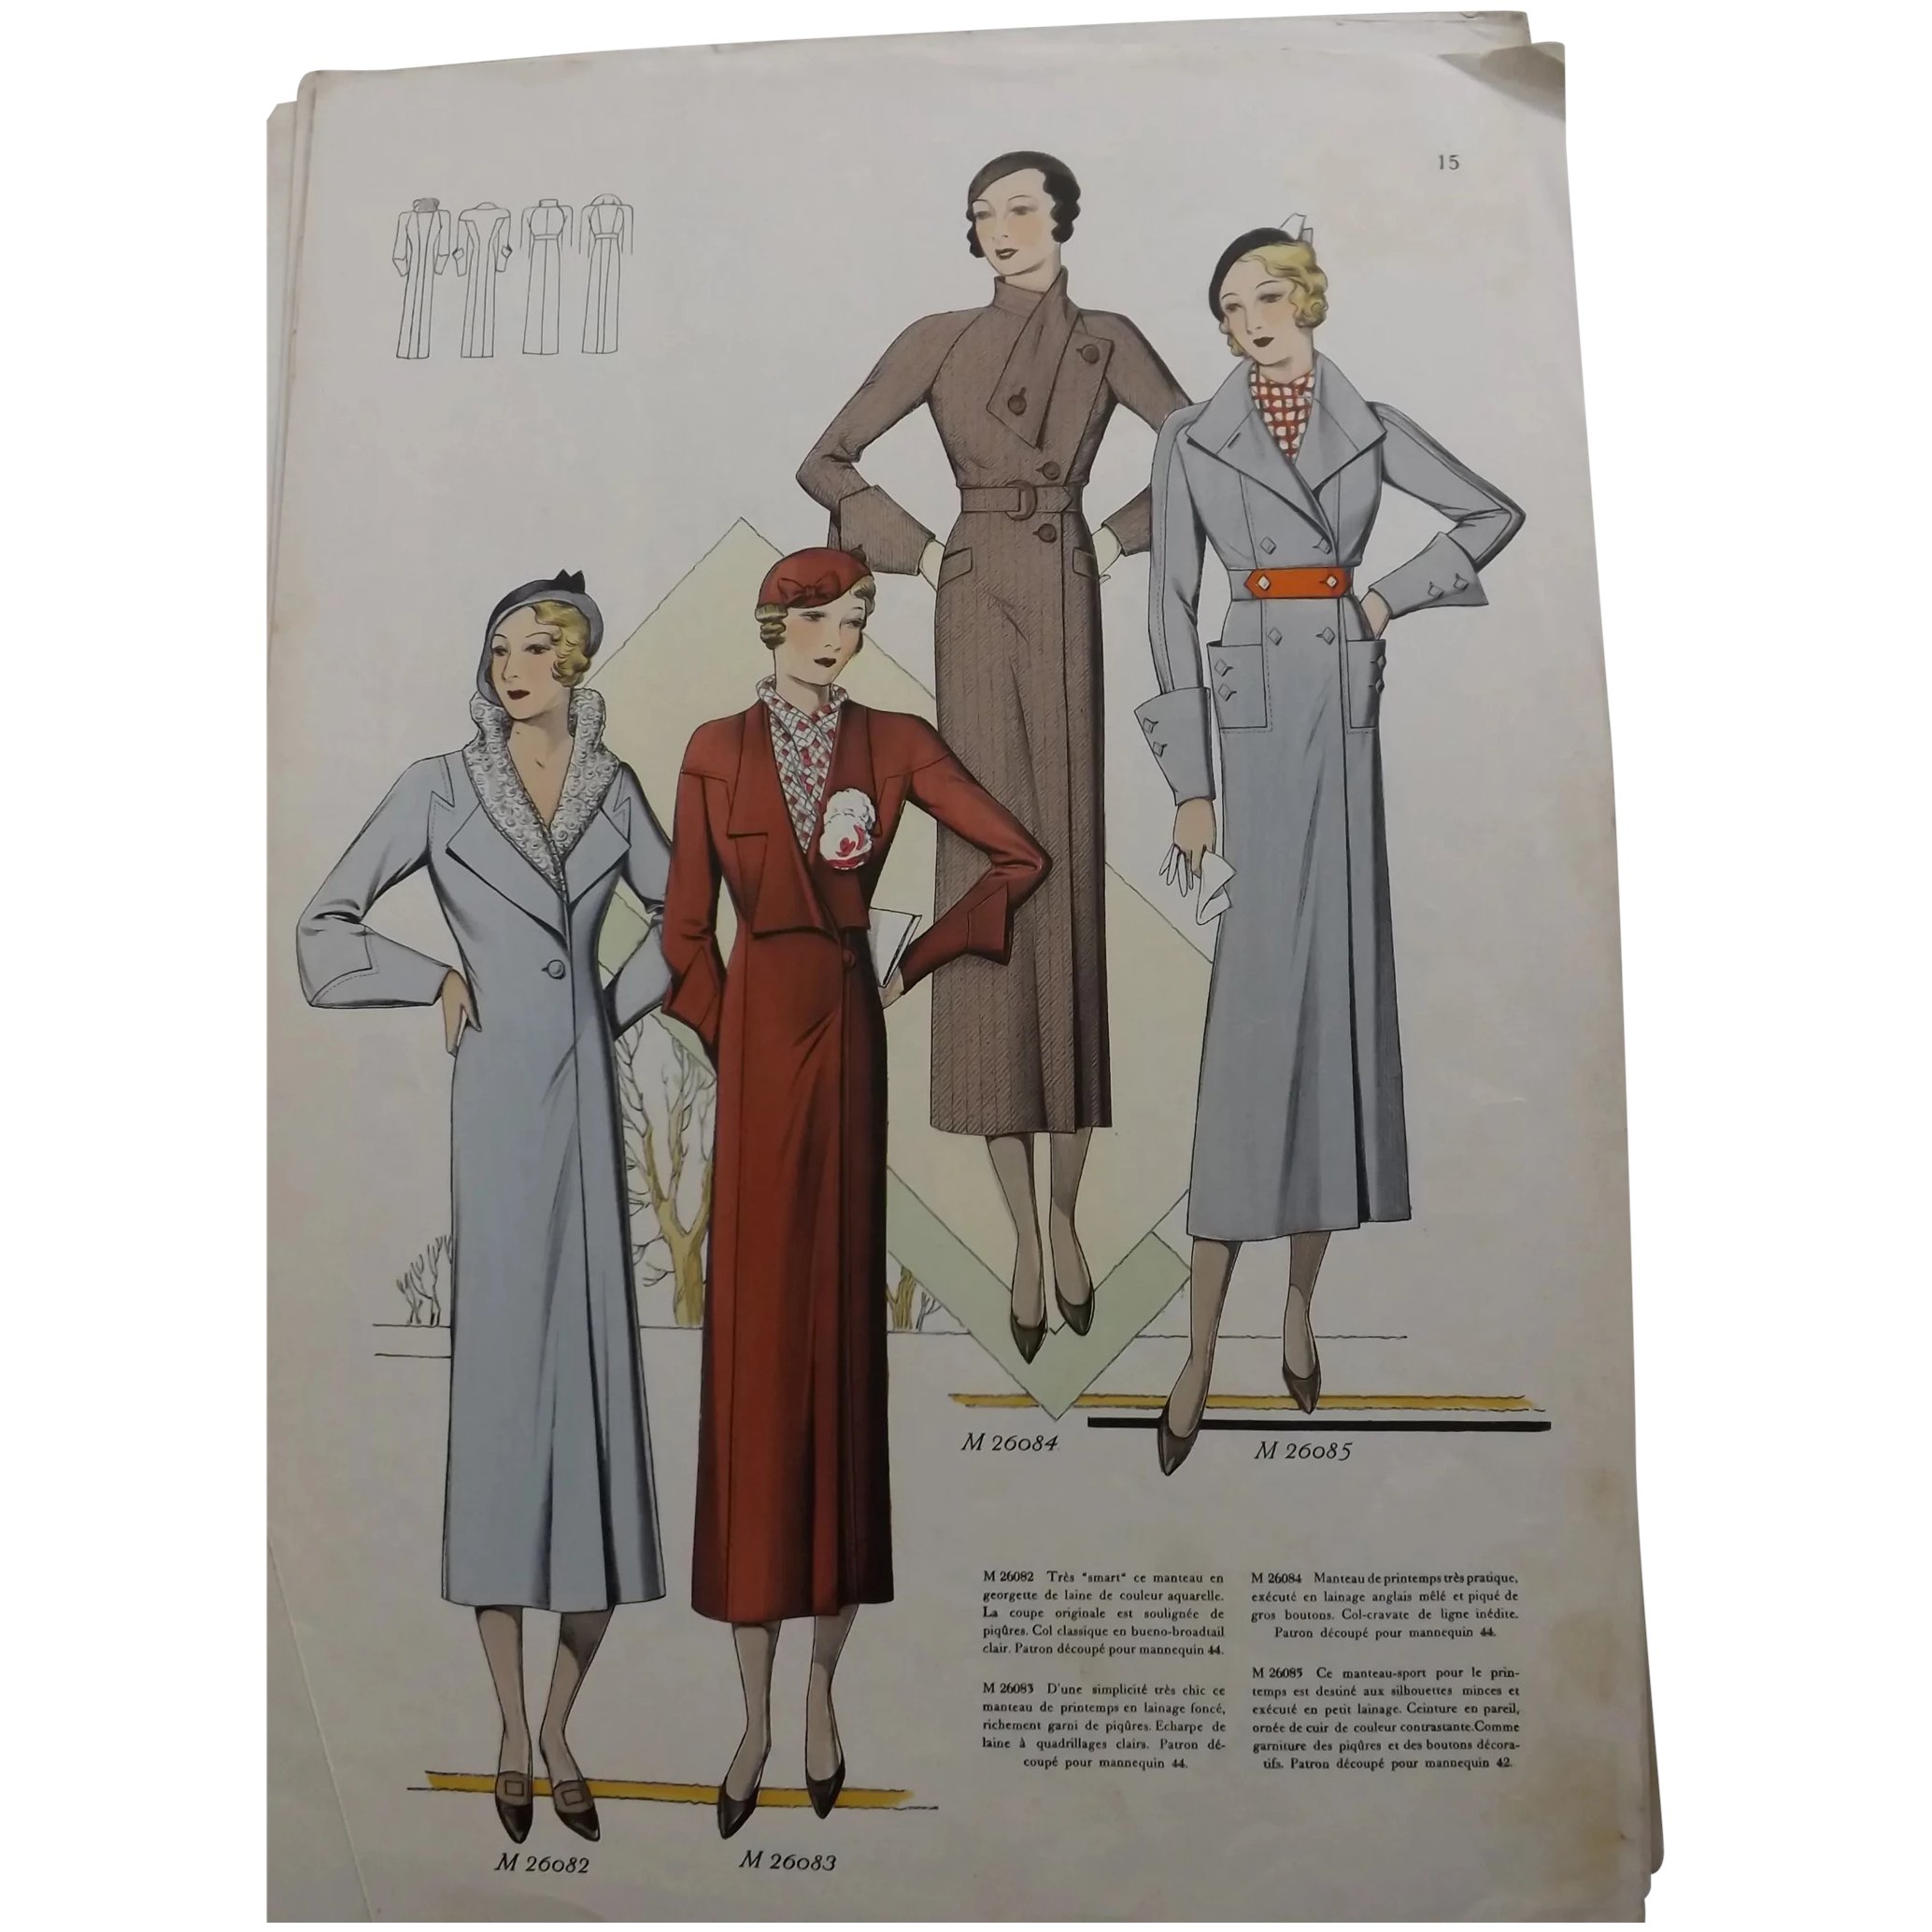 Original French Fashion Pages x Five - Early 1930's Art Deco